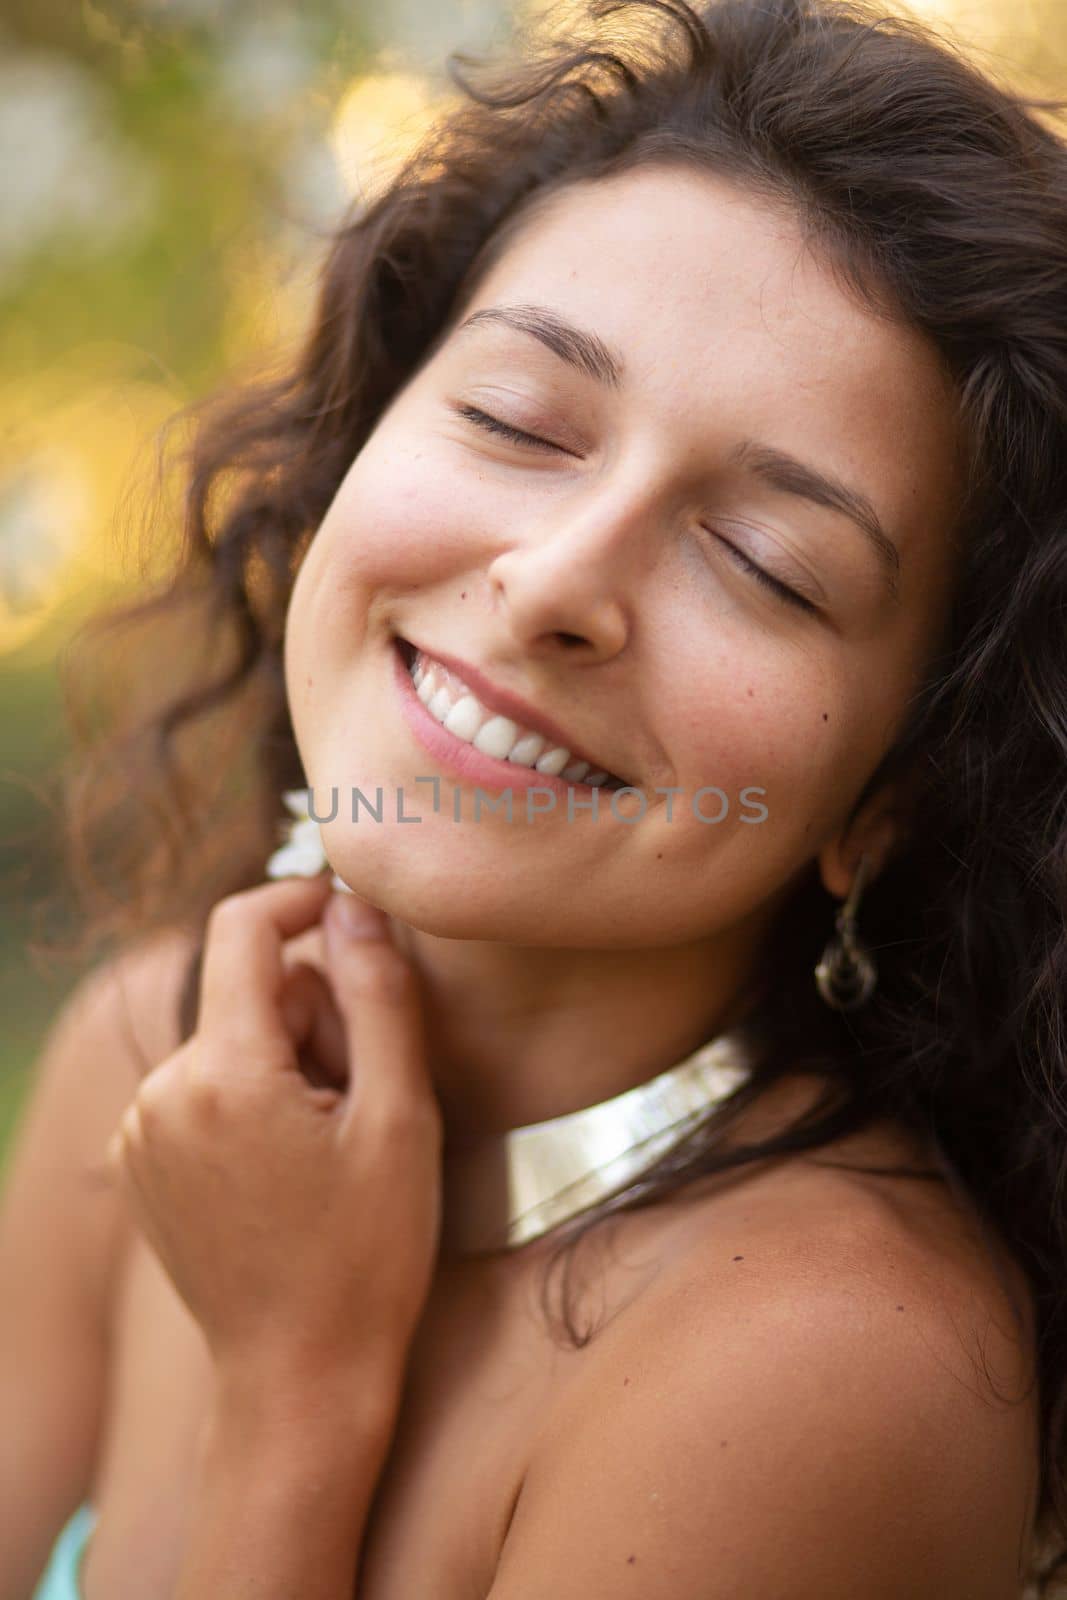 Portrait of a young laughing sexy brunette girl with a necklace around her neck.